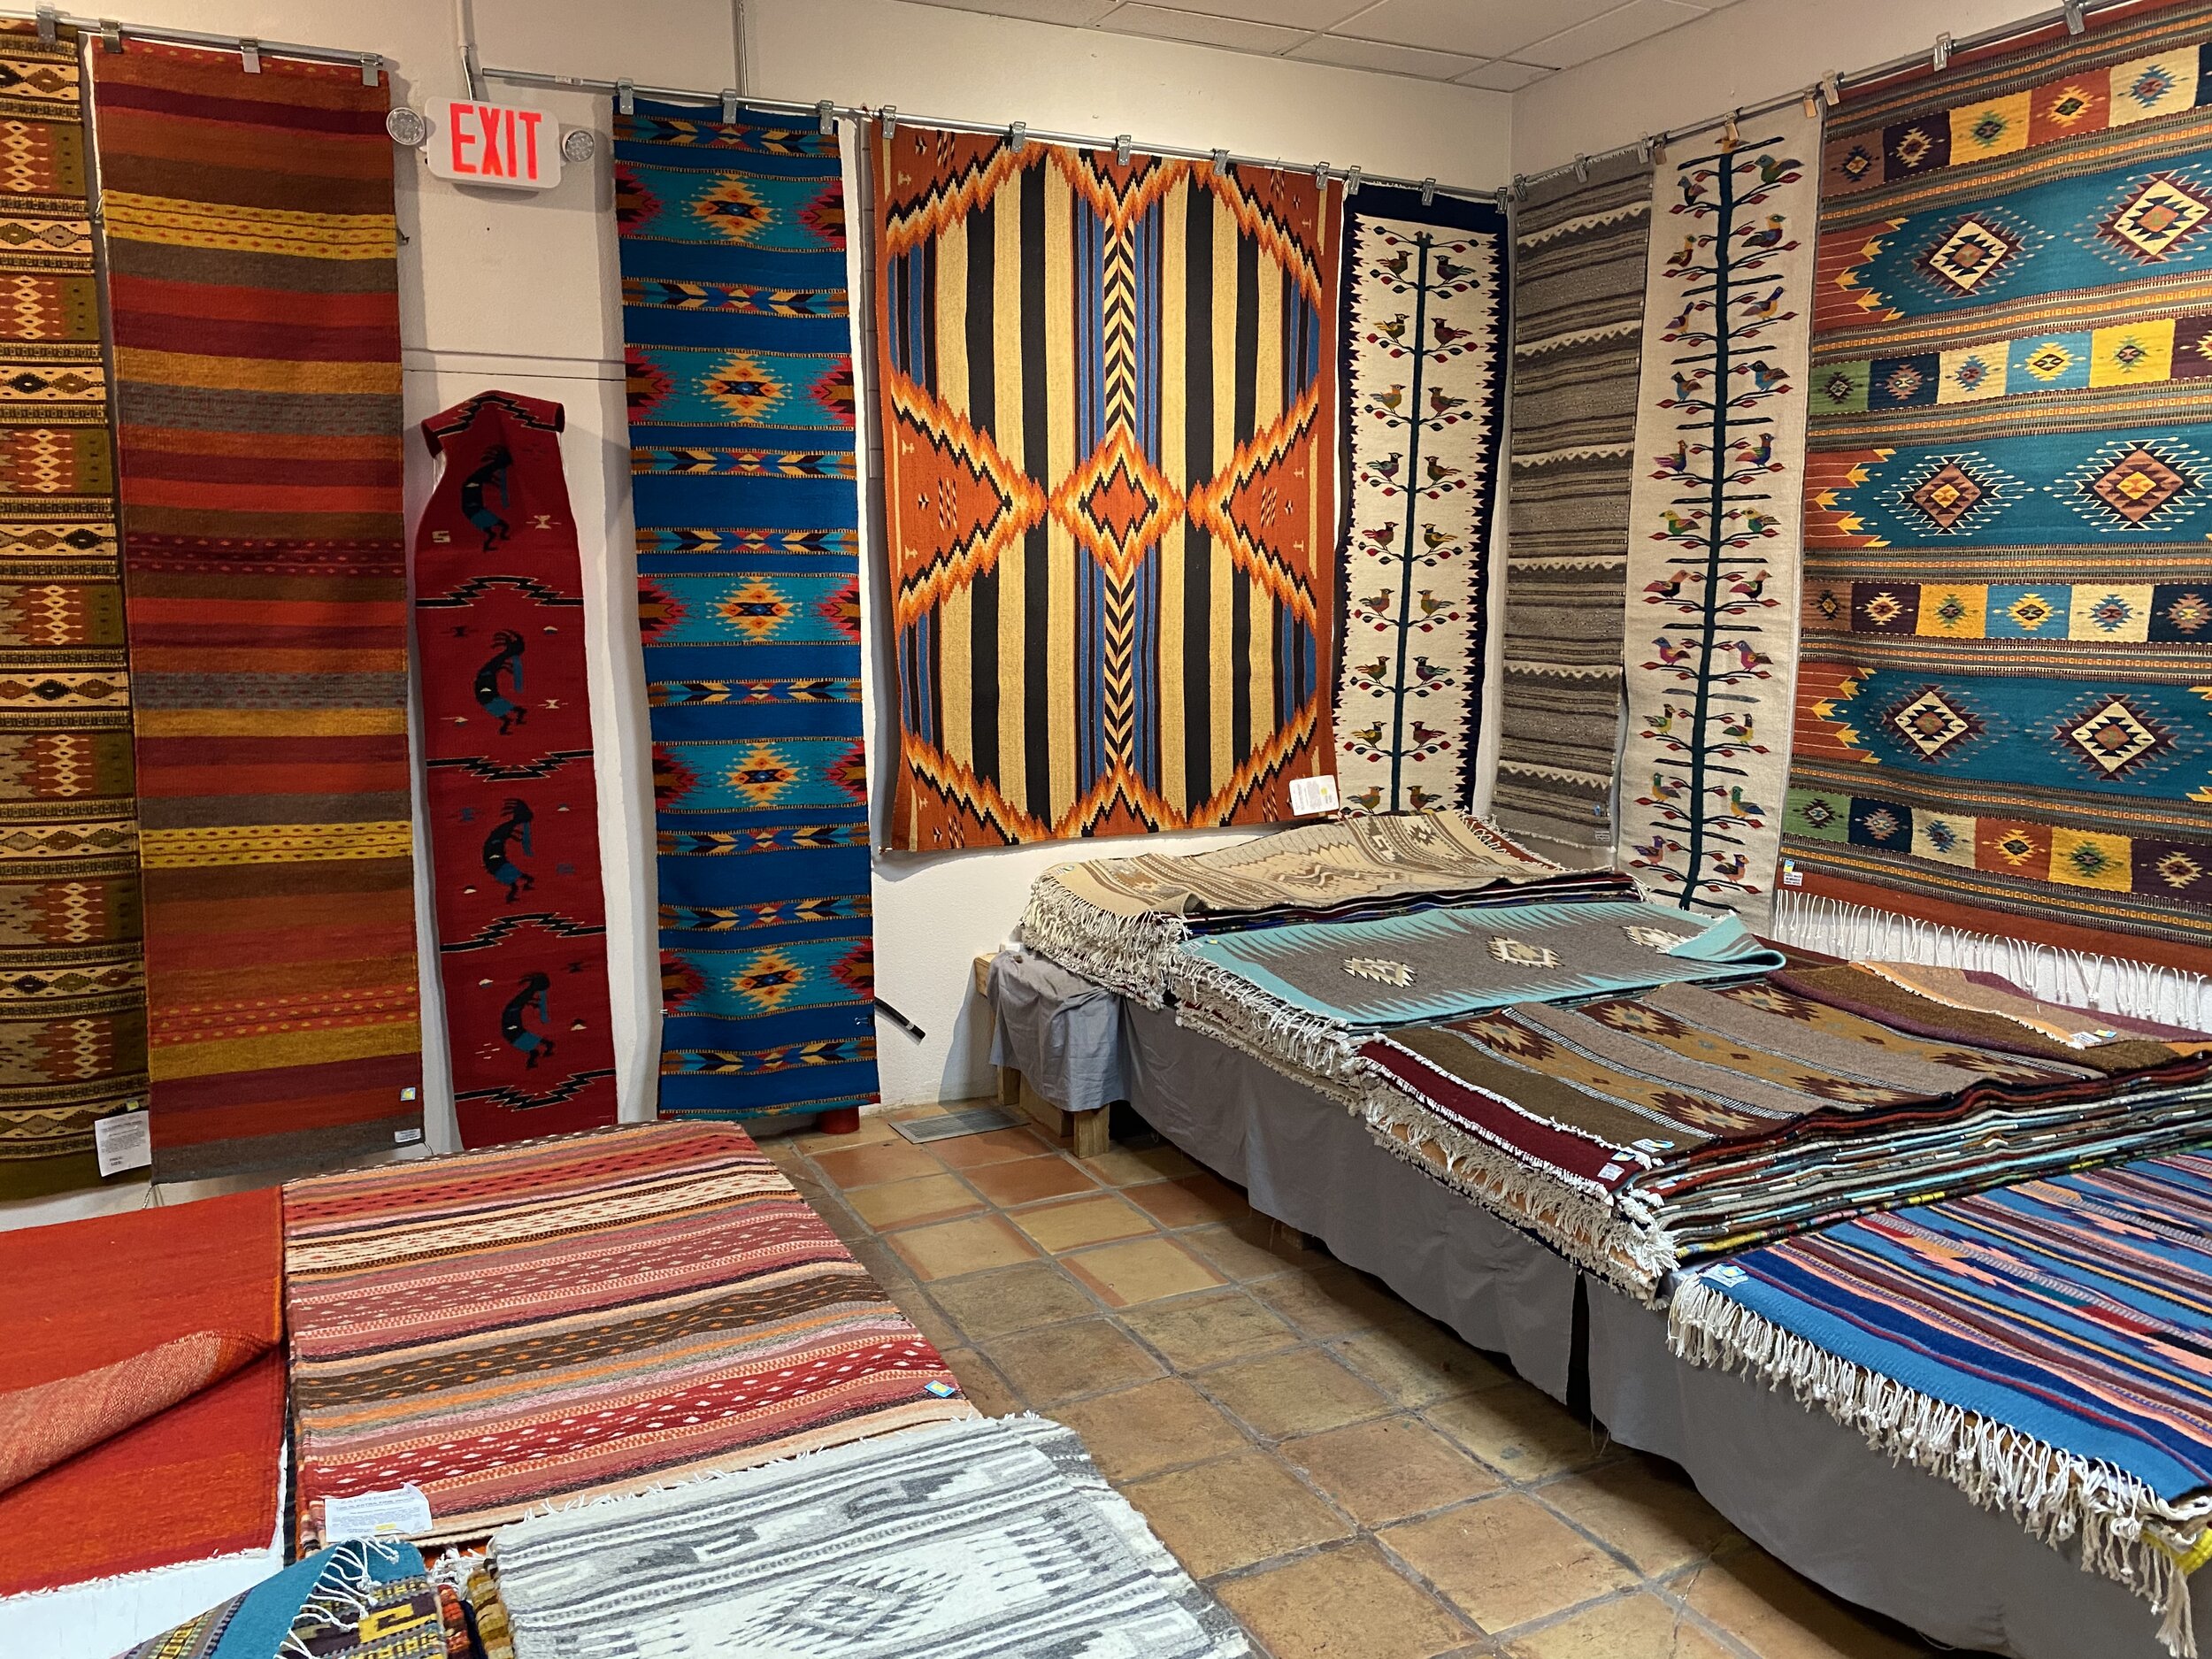 Rug store display of colorful, patterned Southwestern rugs